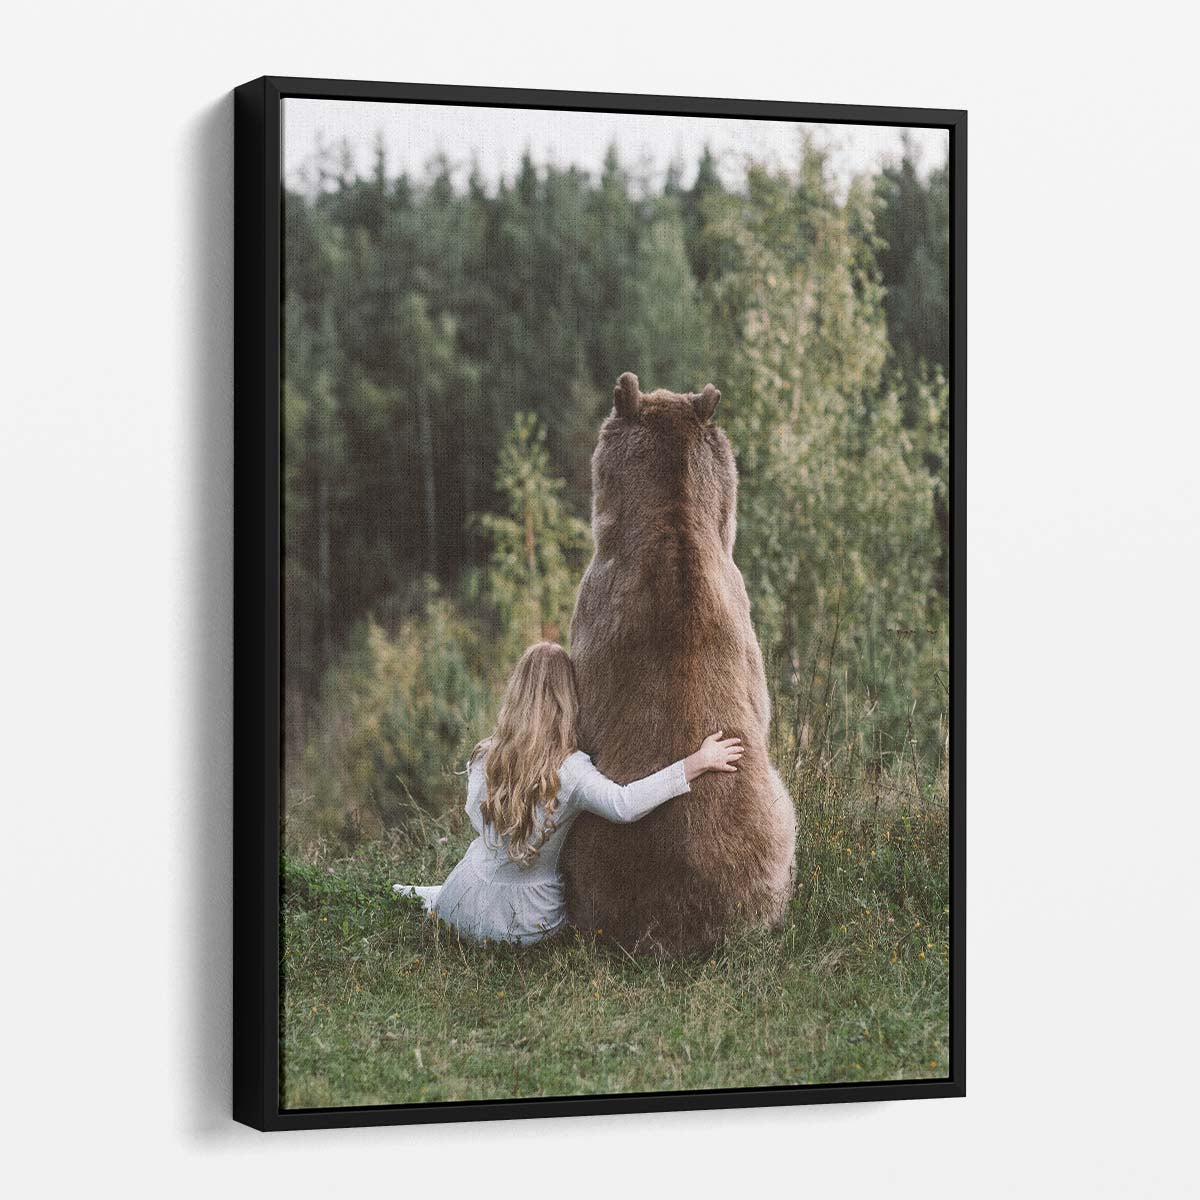 Romantic Fantasy Photography Child's Tender Embrace with Guardian Brown Bear by Luxuriance Designs, made in USA